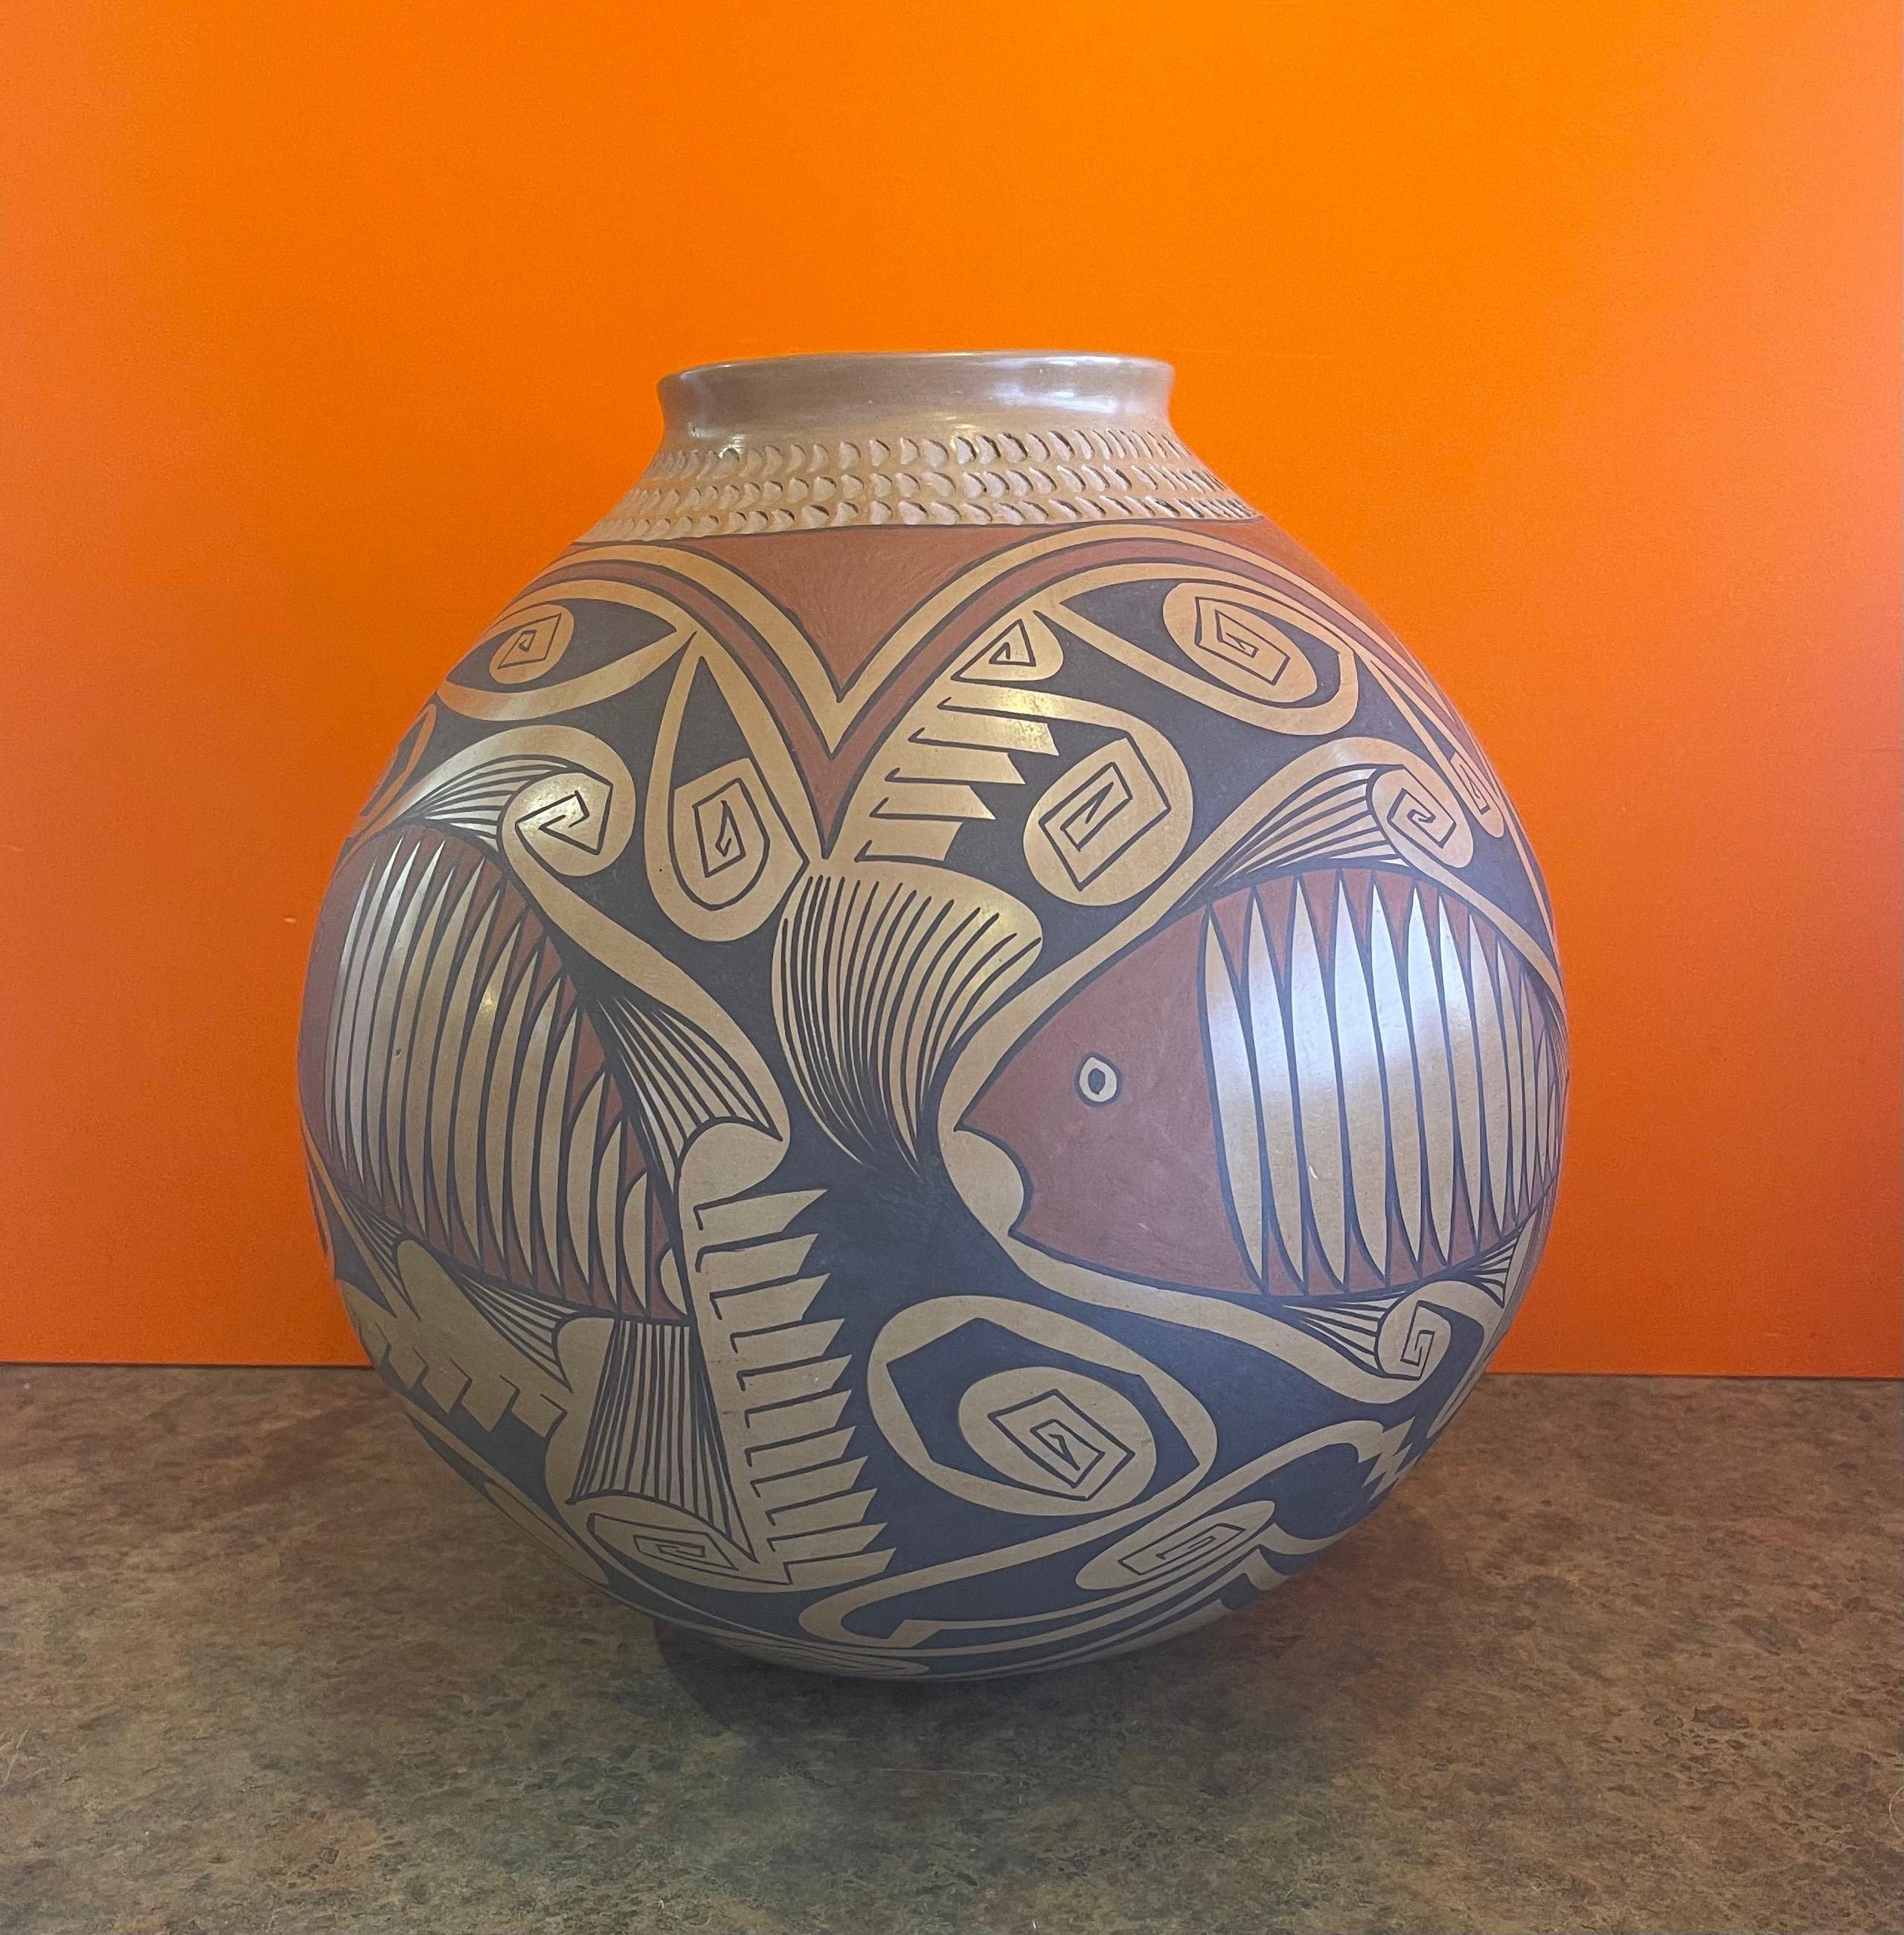 Beautiful hand-turned massive Mata Ortiz polychrome pottery vessel with fish motif by Gloria Hernandez, circa 1990s. The exquisite piece made of naturally brown clay has a unique black and brown fish design. This vase is in very good condition and